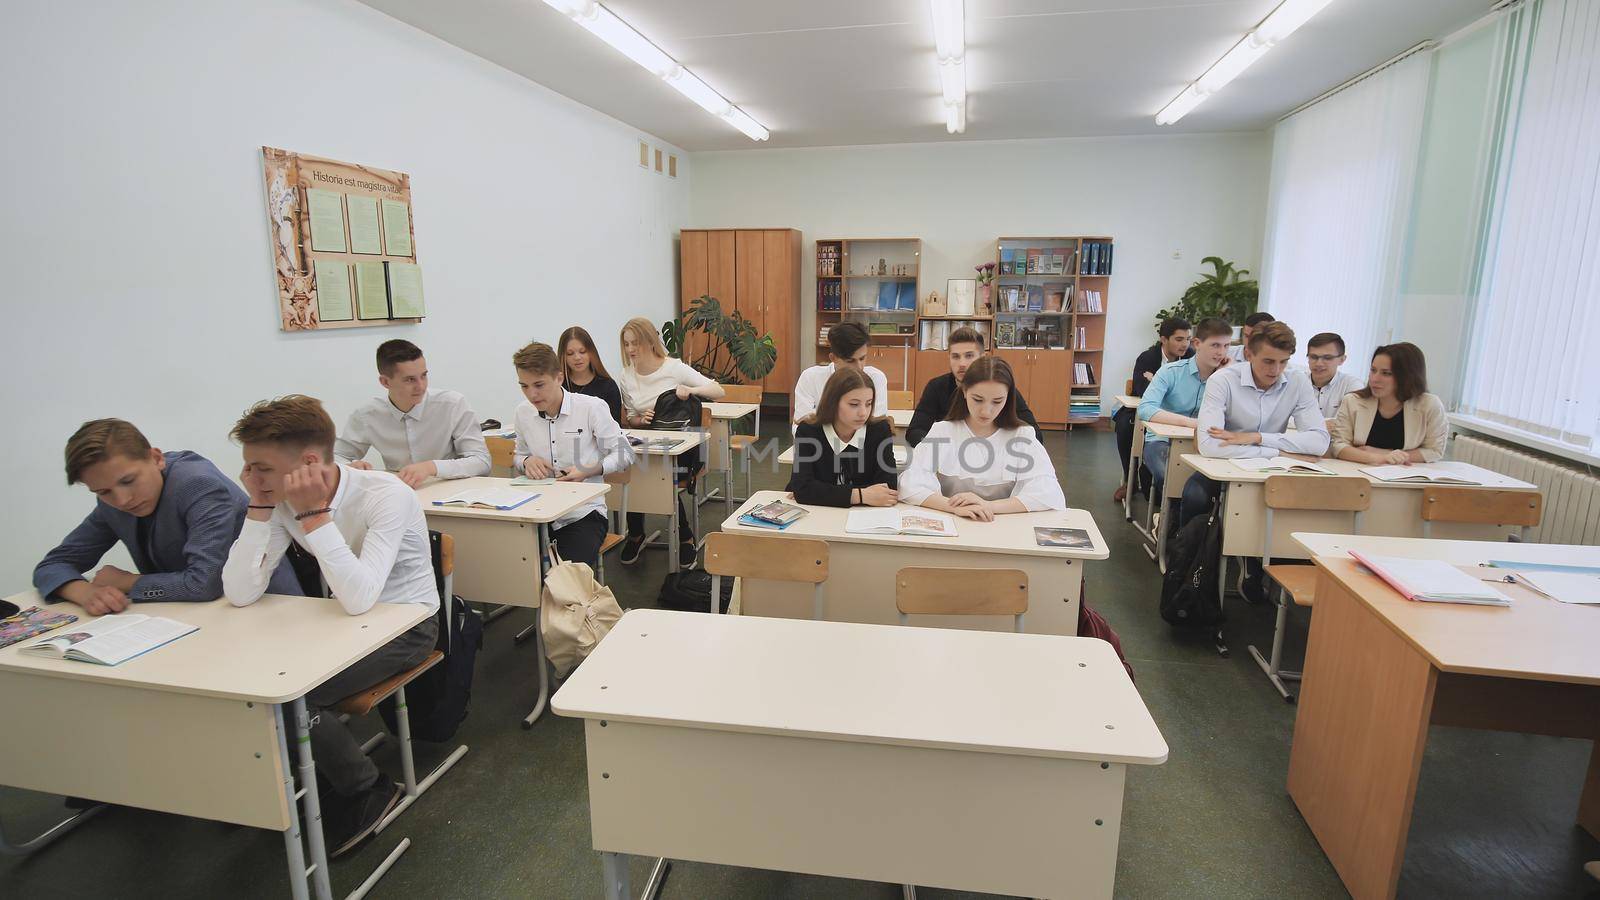 Students in the classroom sit at school desks before the lesson. Russian school